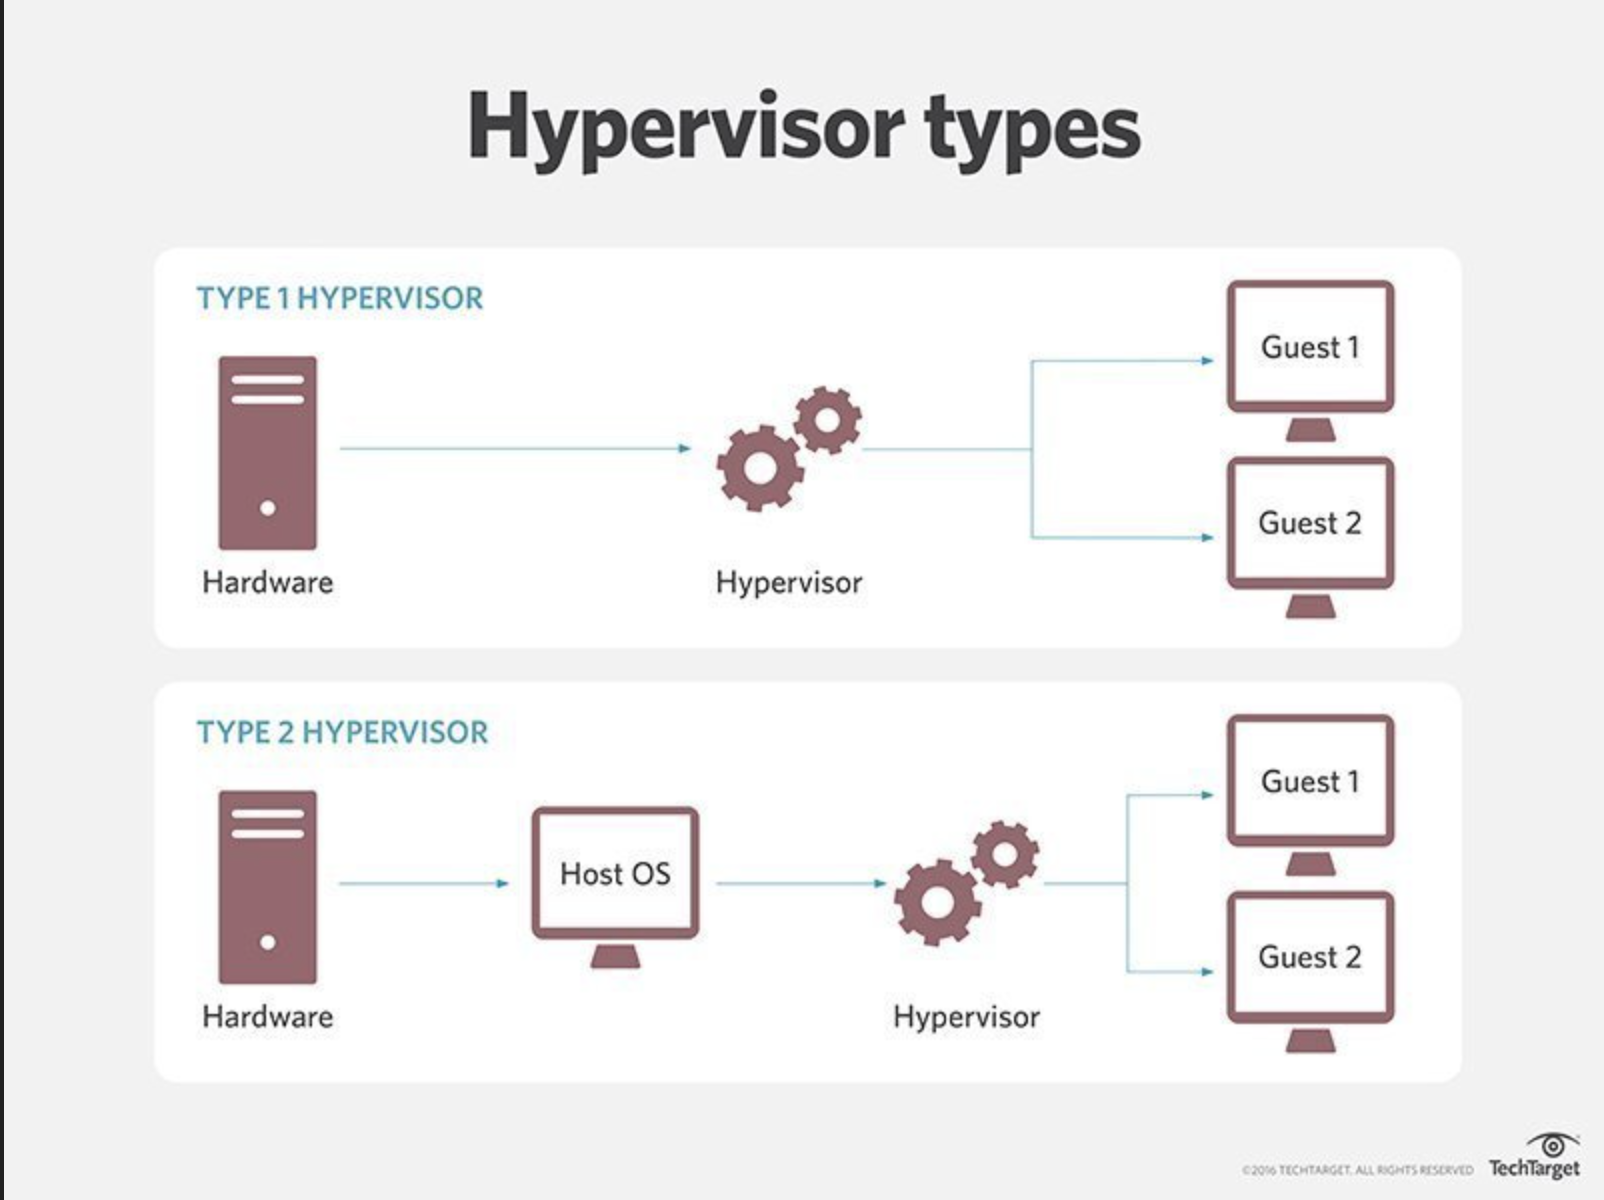 Hypervisor Type 1 vs 2(https://www.techtarget.com/searchitoperations/tip/Whats-the-difference-between-Type-1-vs-Type-2-hypervisor)